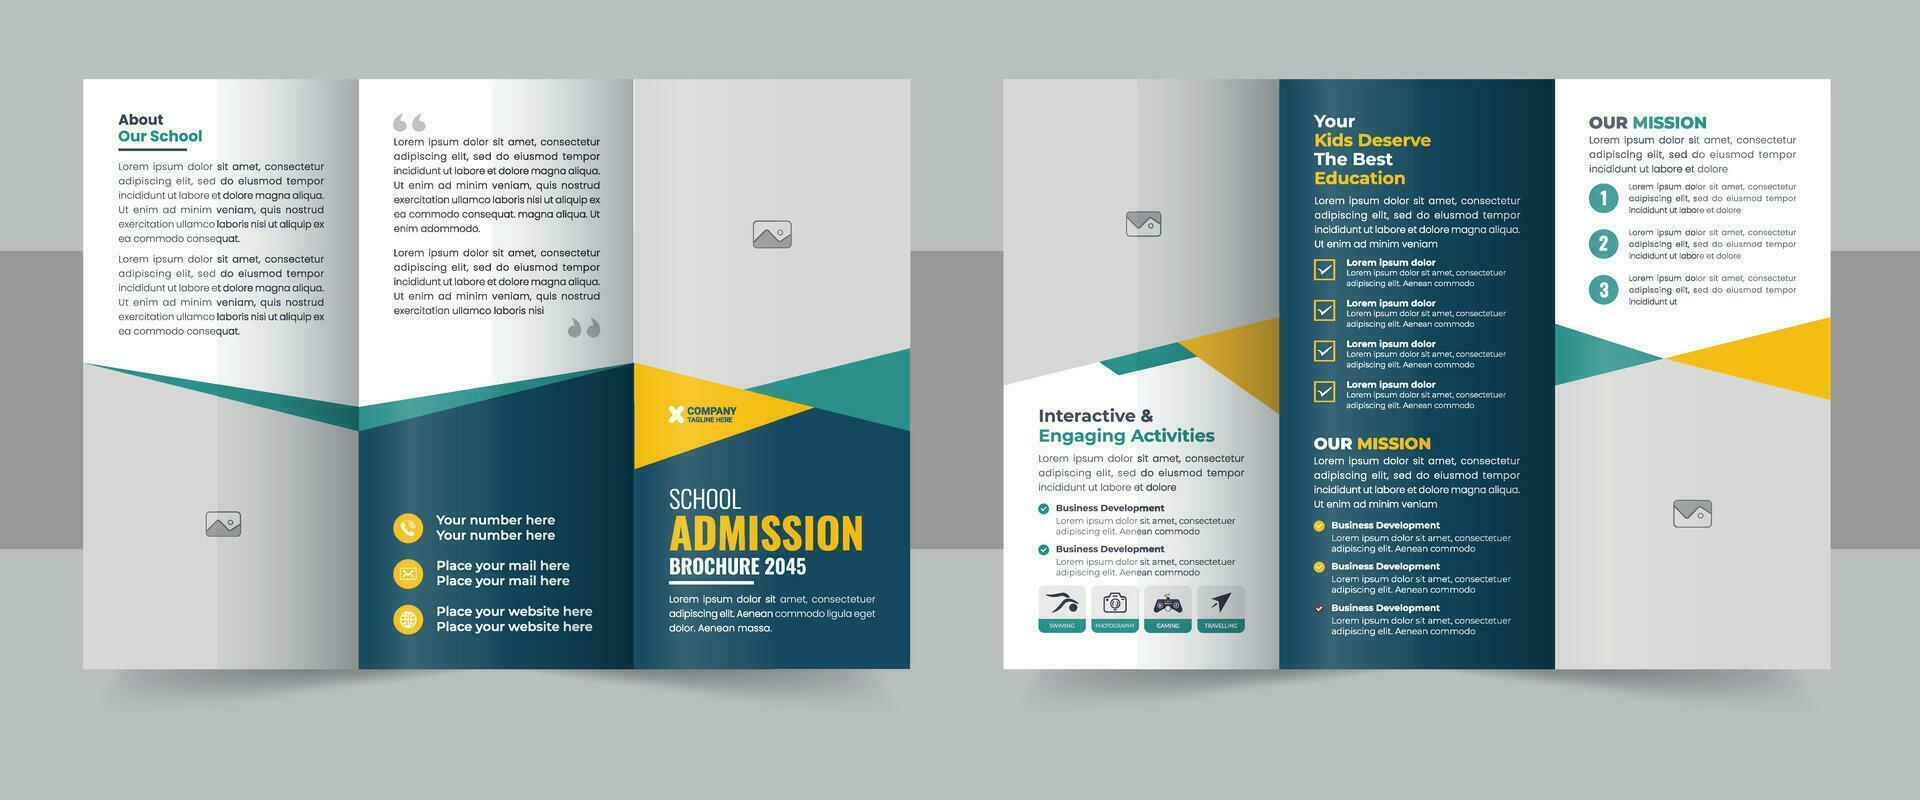 Modern kids school admission trifold brochure template, school trifold brochure design, back to school admission trifold brochure design template or Corporate trifold brochure layout vector